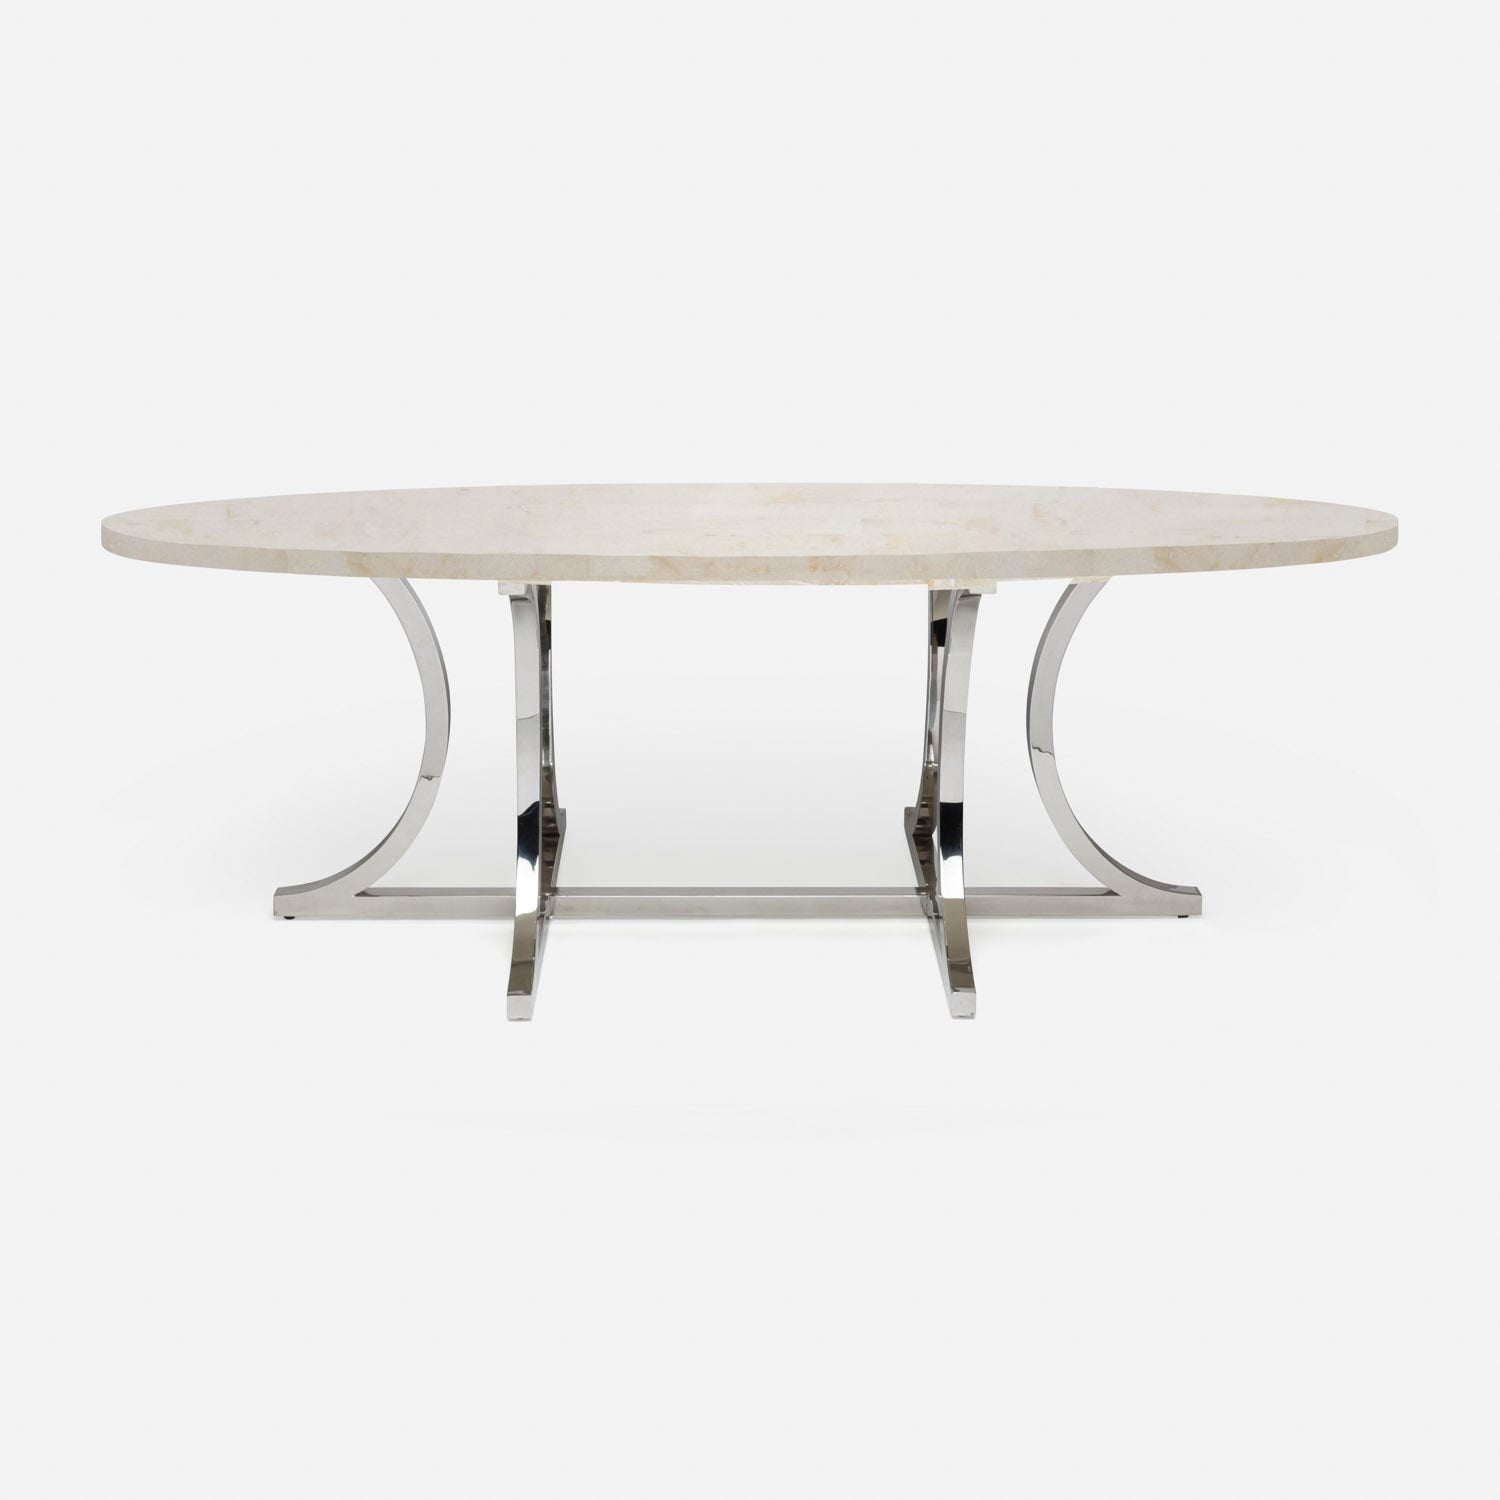 Made Goods Leighton 84" x 42" x 30" Polished Silver Steel Dinning Table With Oval Ivory Faux Horn Table Top